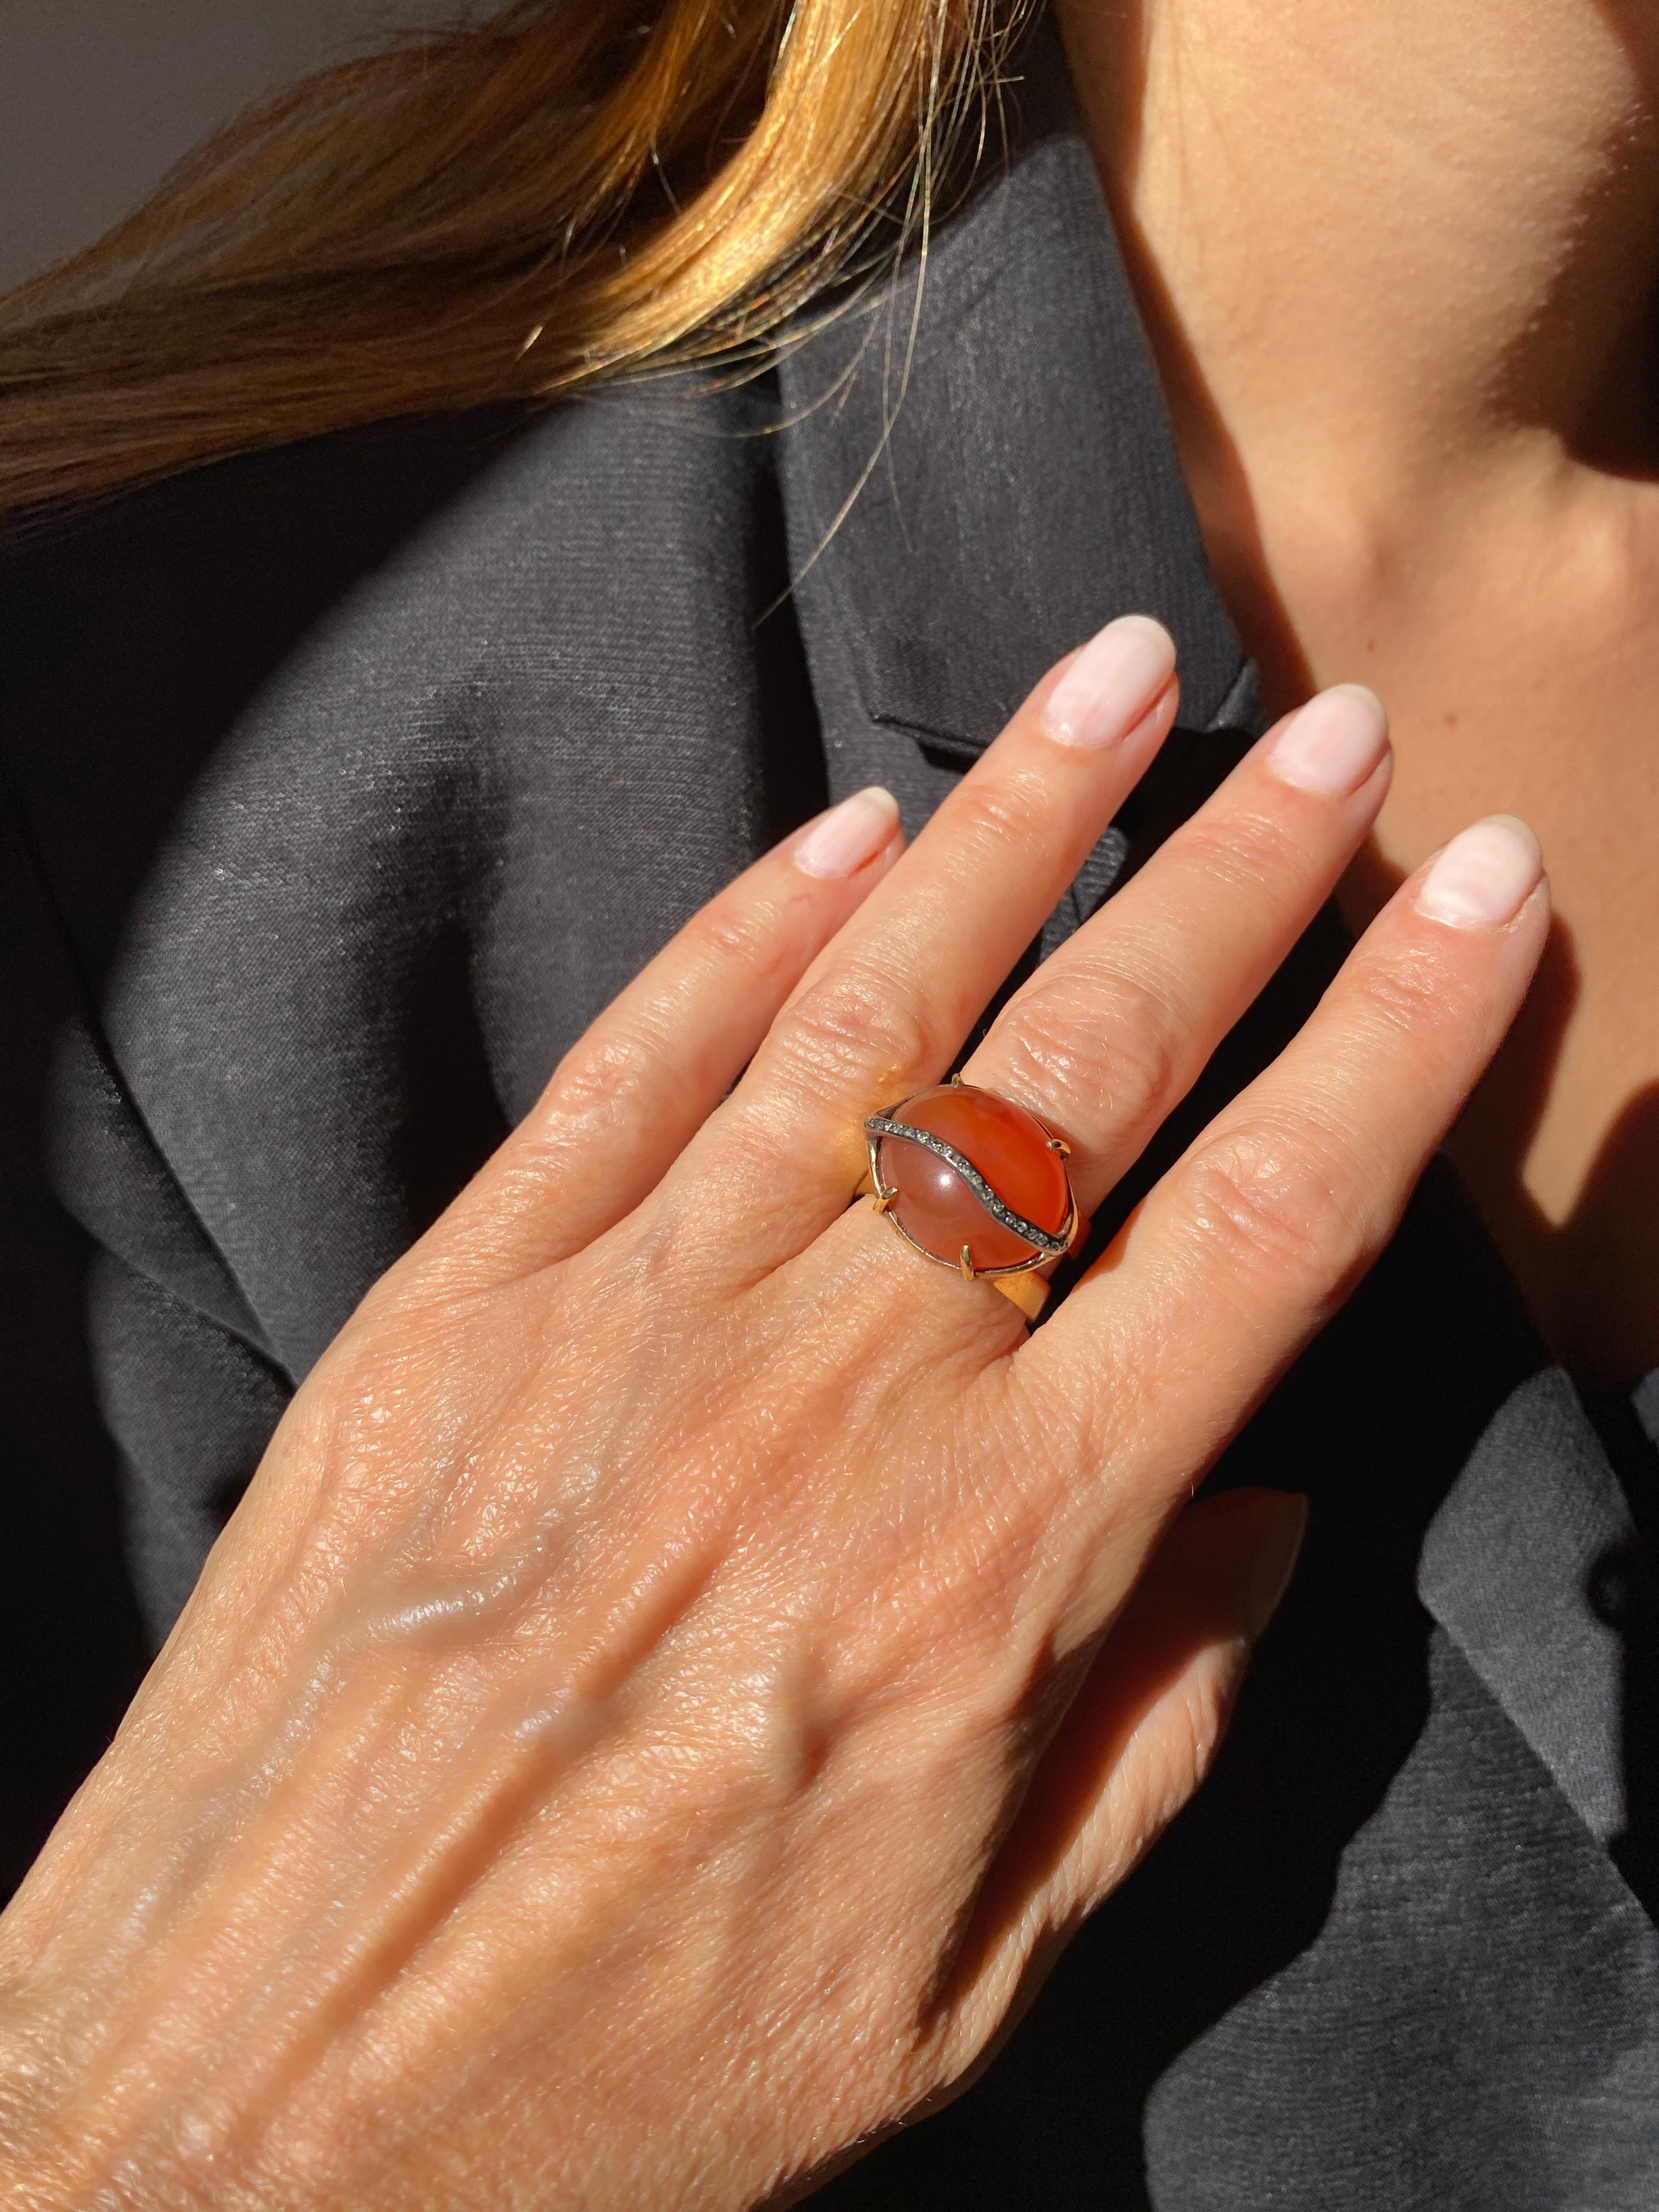 Introducing Rossella Ugolini's Bold Carnelian Ring, a captivating masterpiece handcrafted in Italy that seamlessly marries organic shapes with bohemian allure.

At the heart of this unique piece is an oval cabochon Carnelian  0,74in x 0,59in  ( 1,9